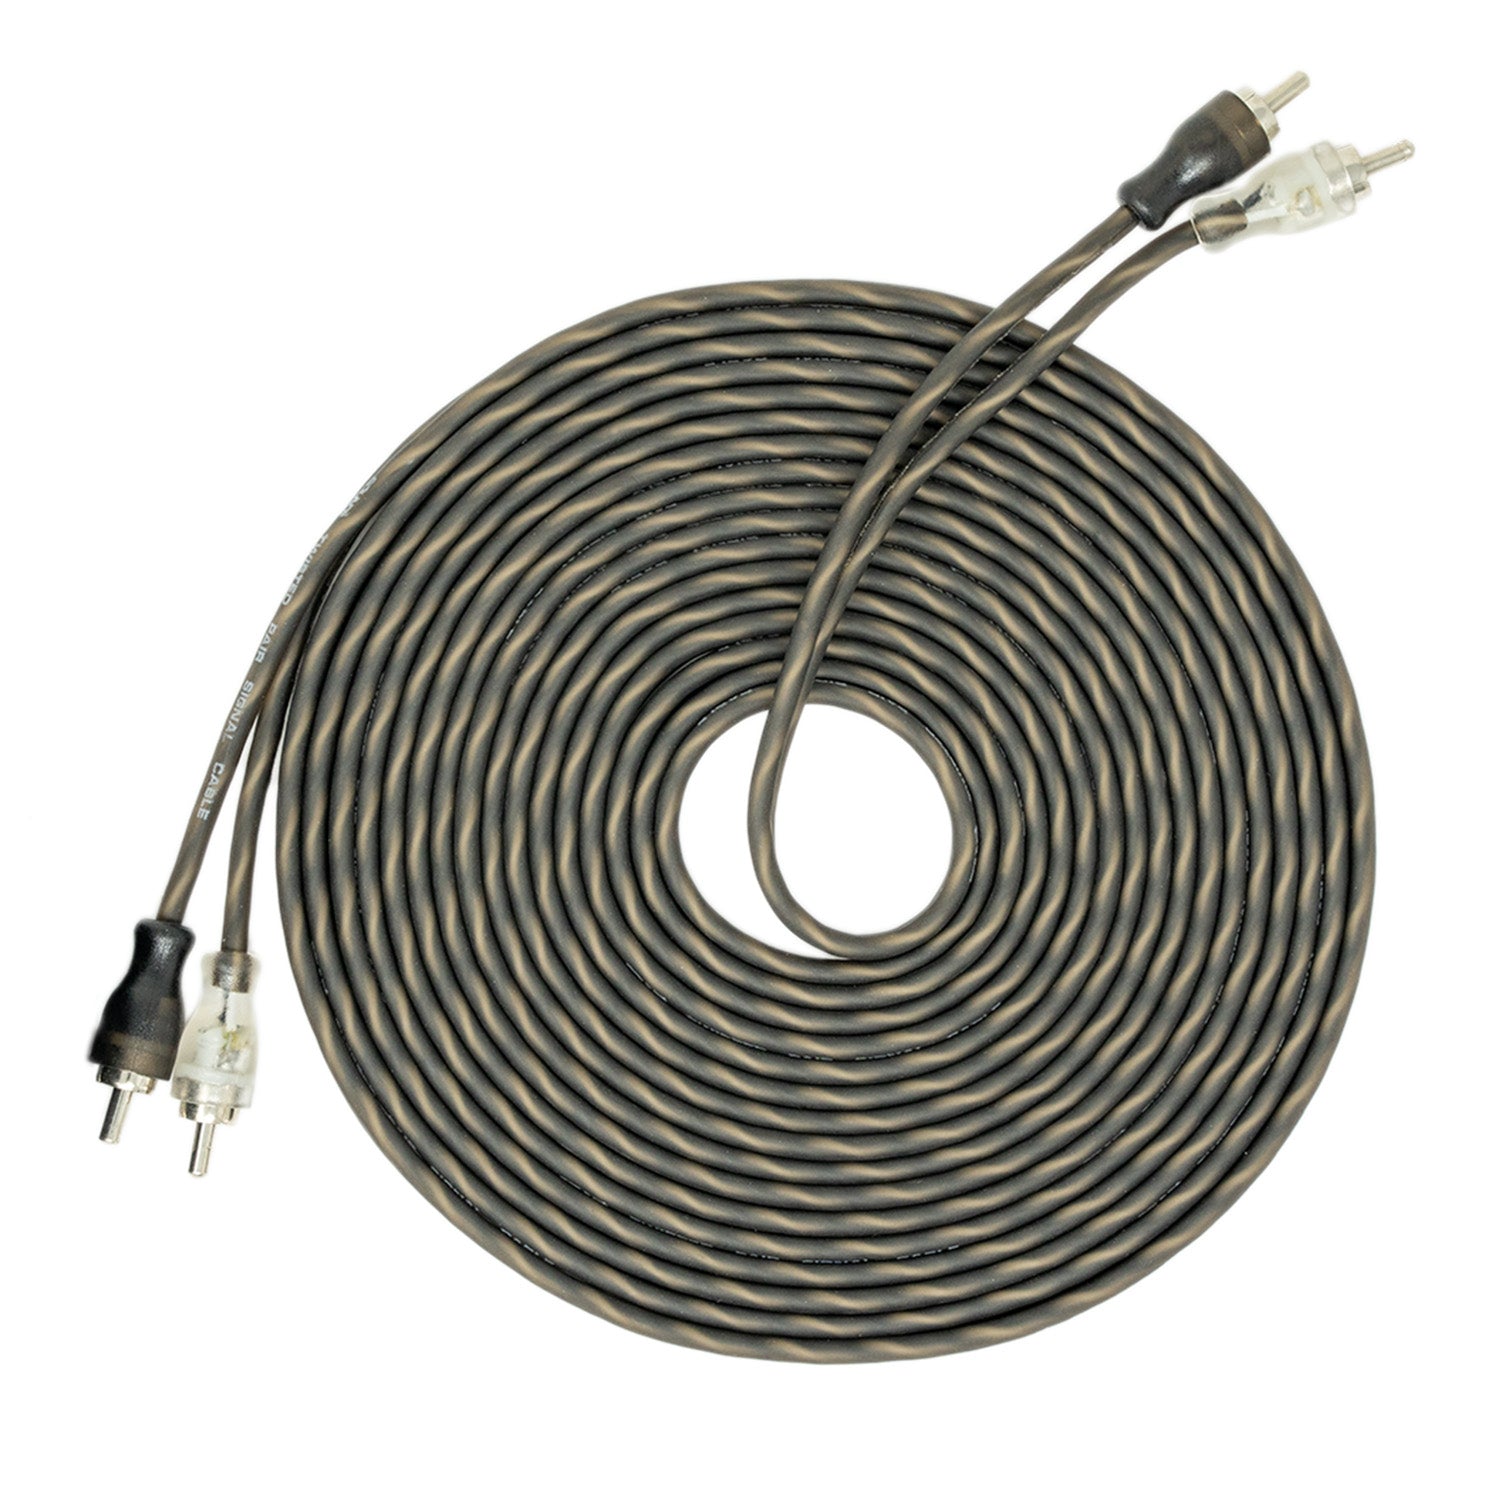 SoundBox LC-T18, Twisted Pair RCA Interconnect Cable, 18 Ft. - (Polybag Packaging)